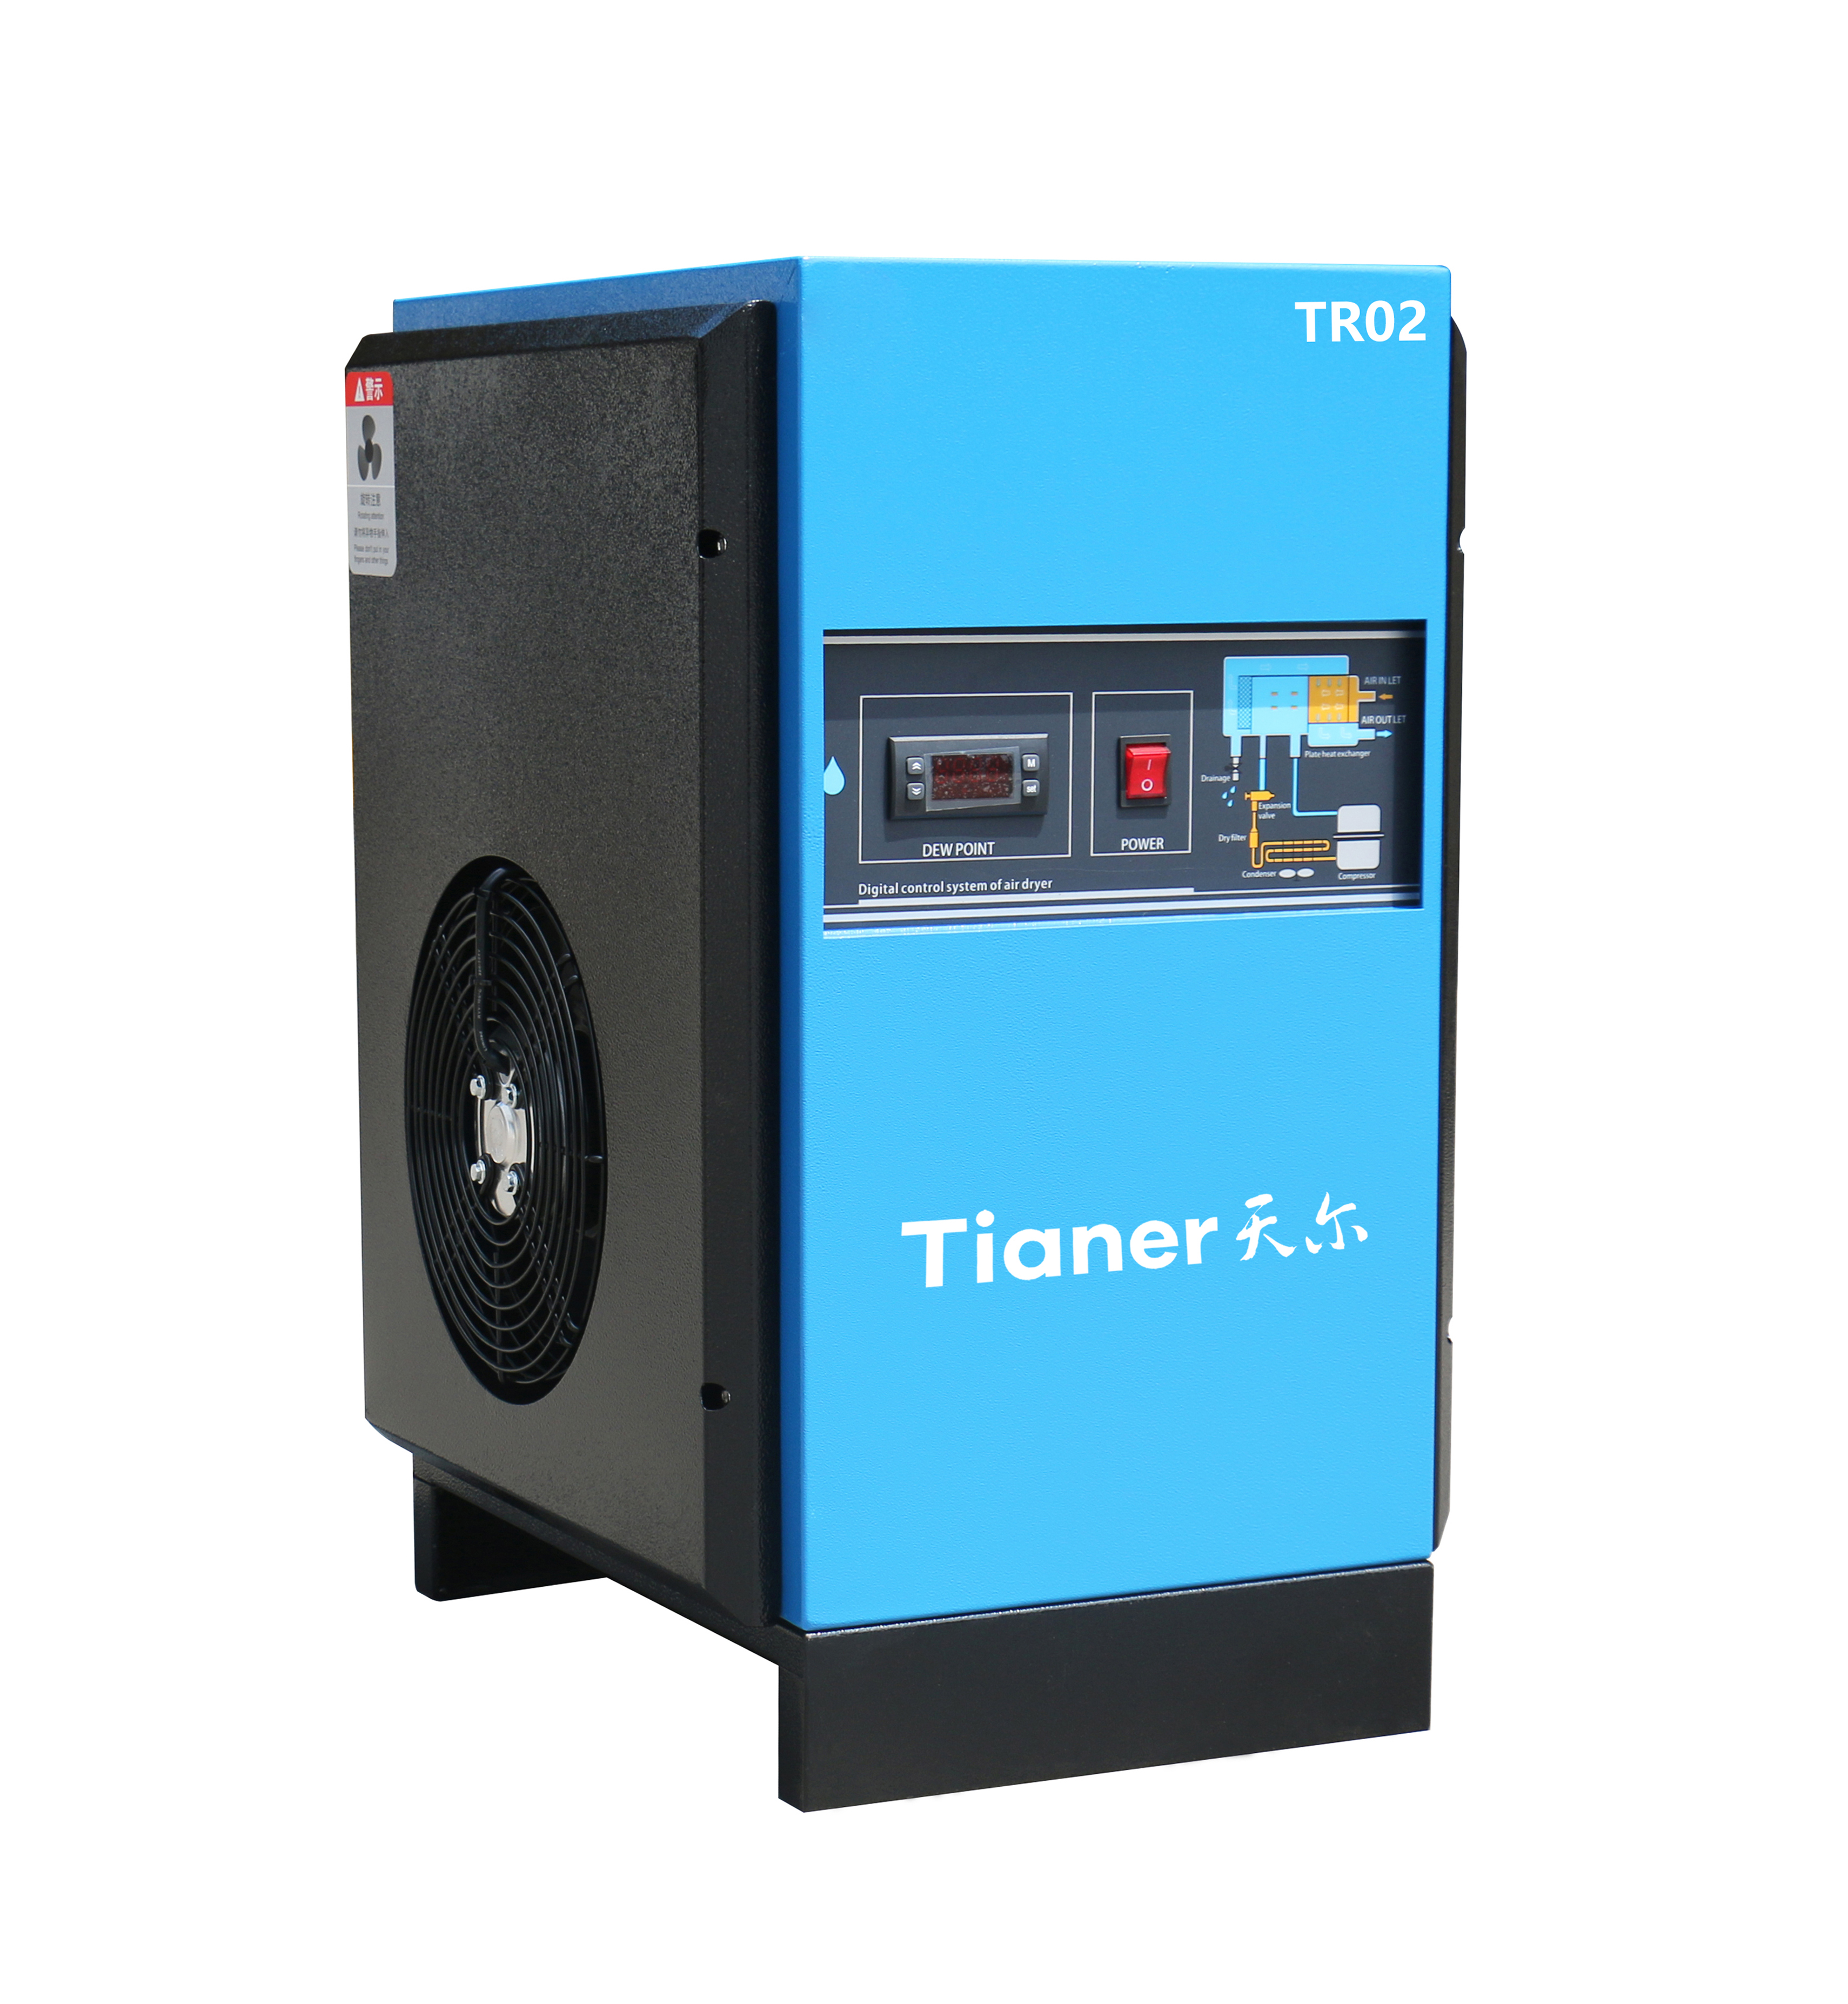 https://www.yctairdryer.com/compress-dryer-machine-tr-01-for-air-compressor-1-2-m3min-product/